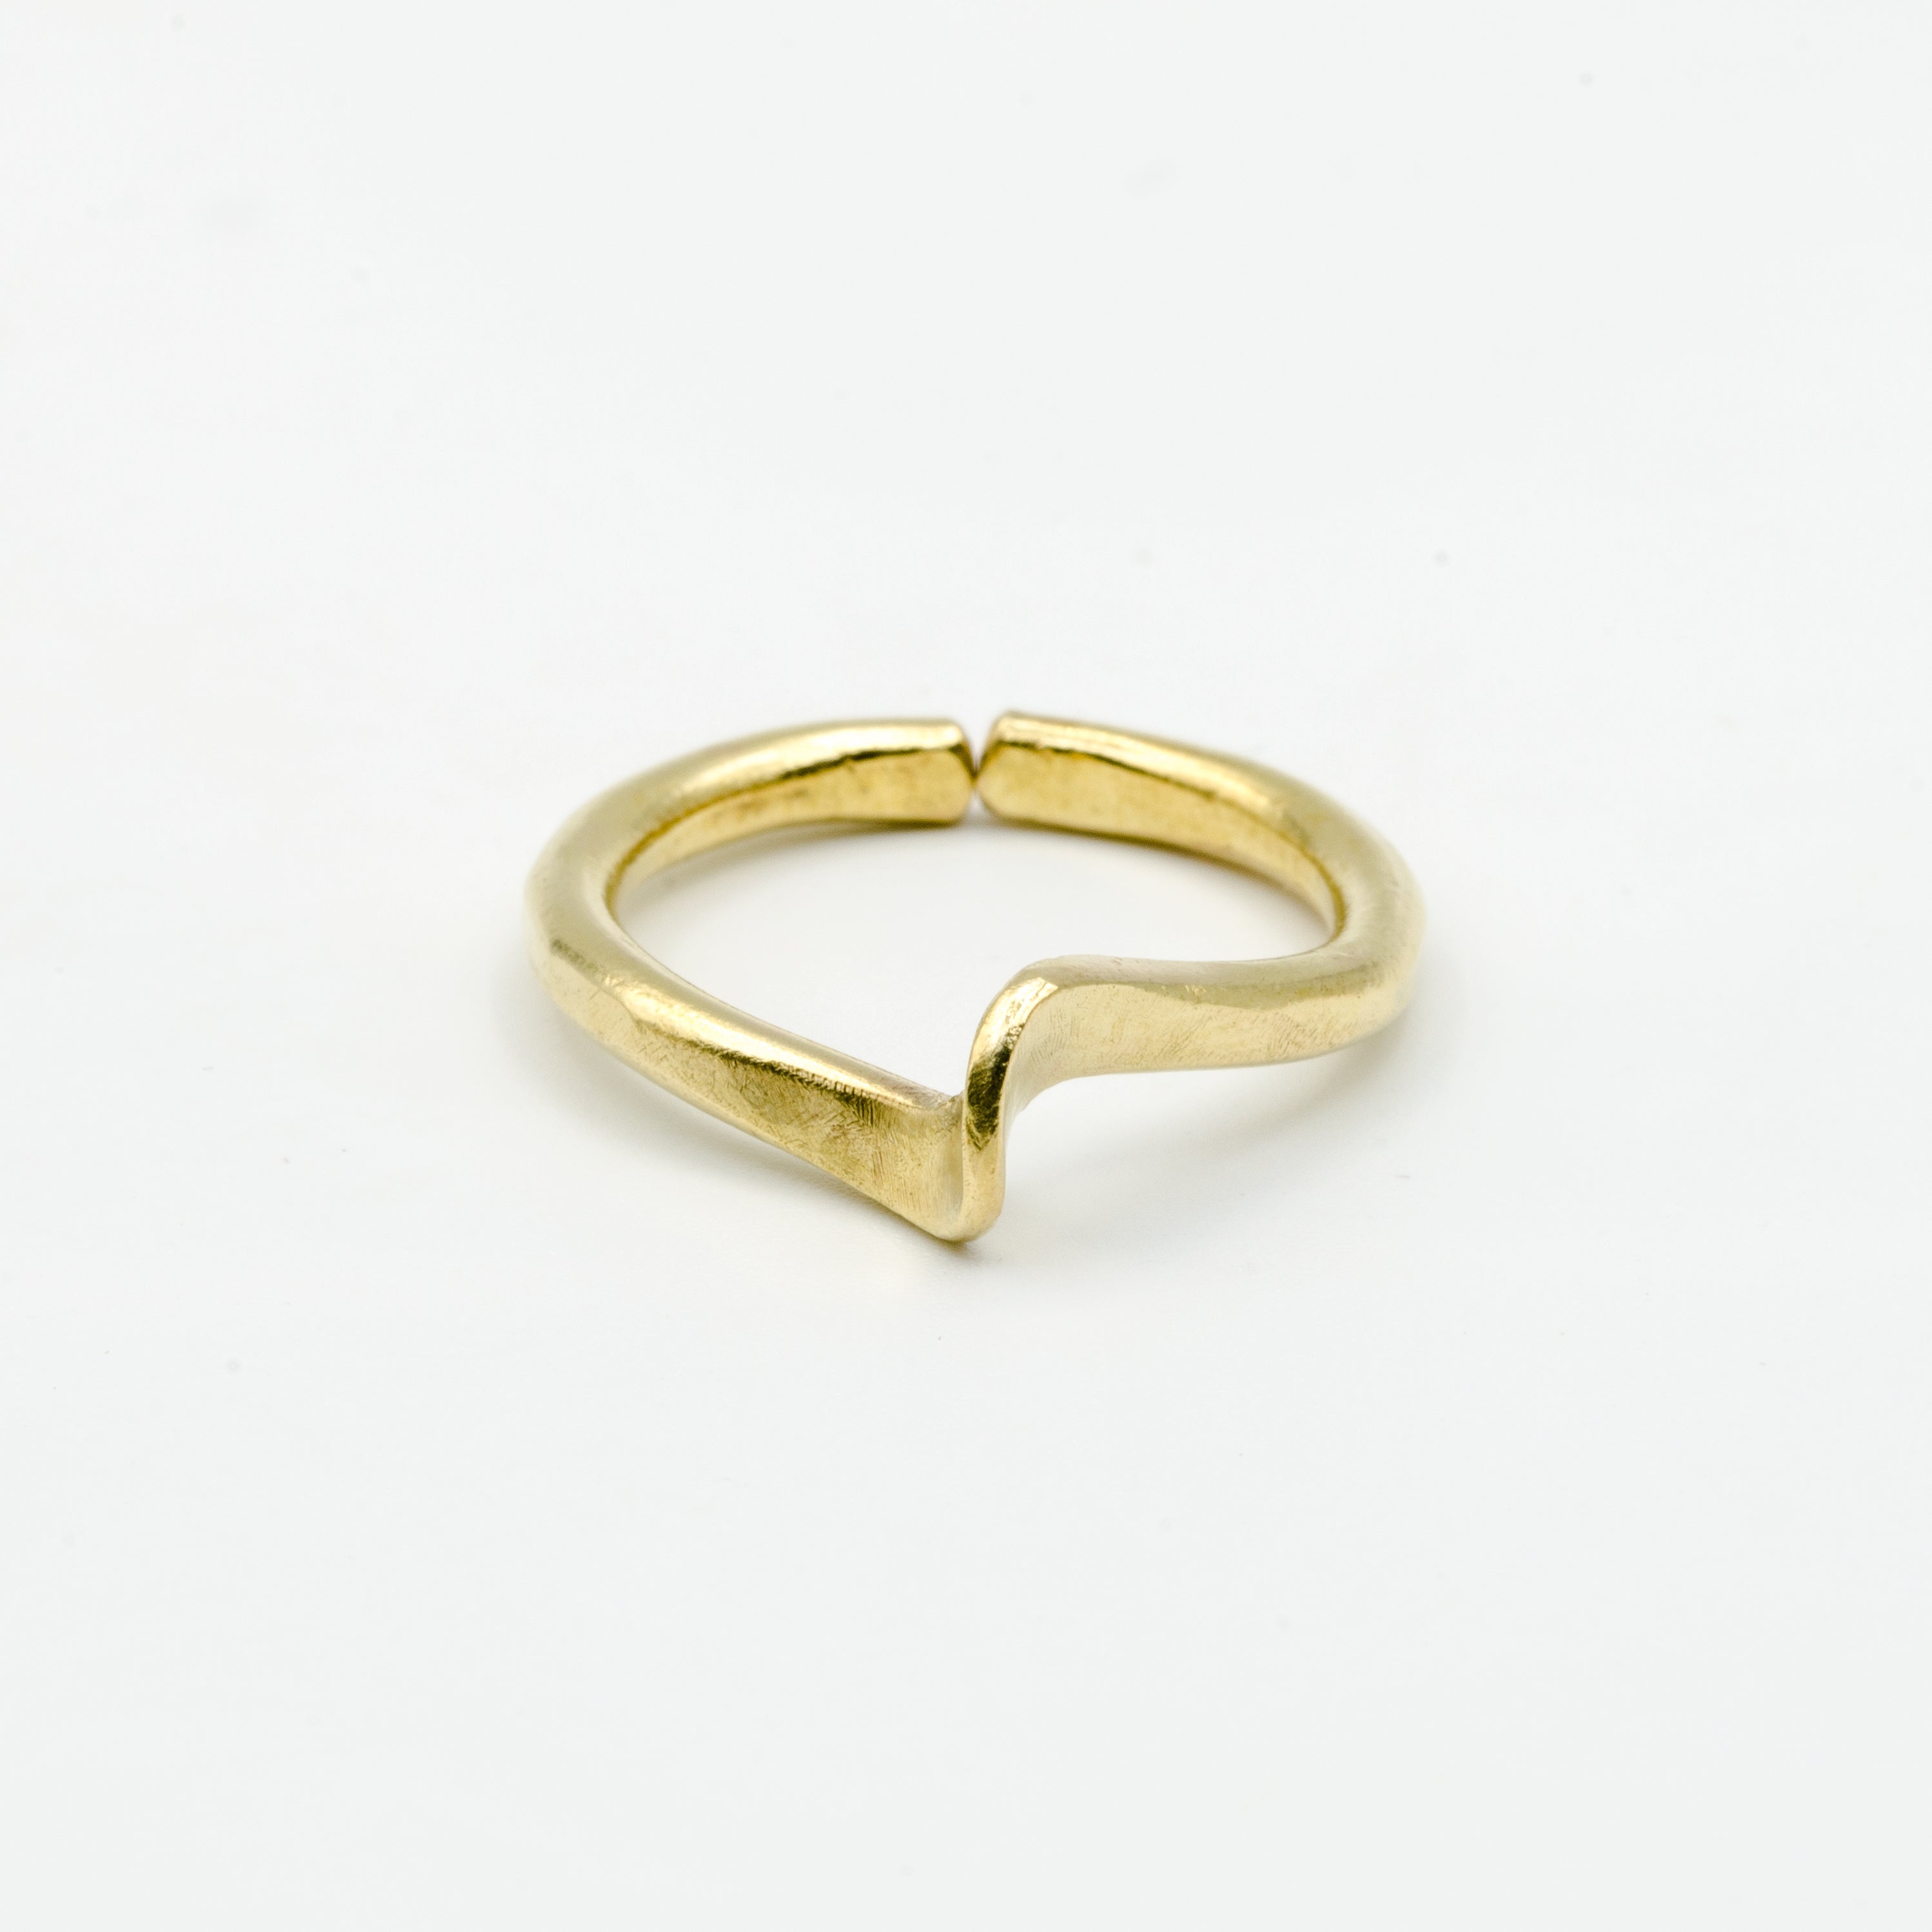 top view of hand forged curved brass ring on white background